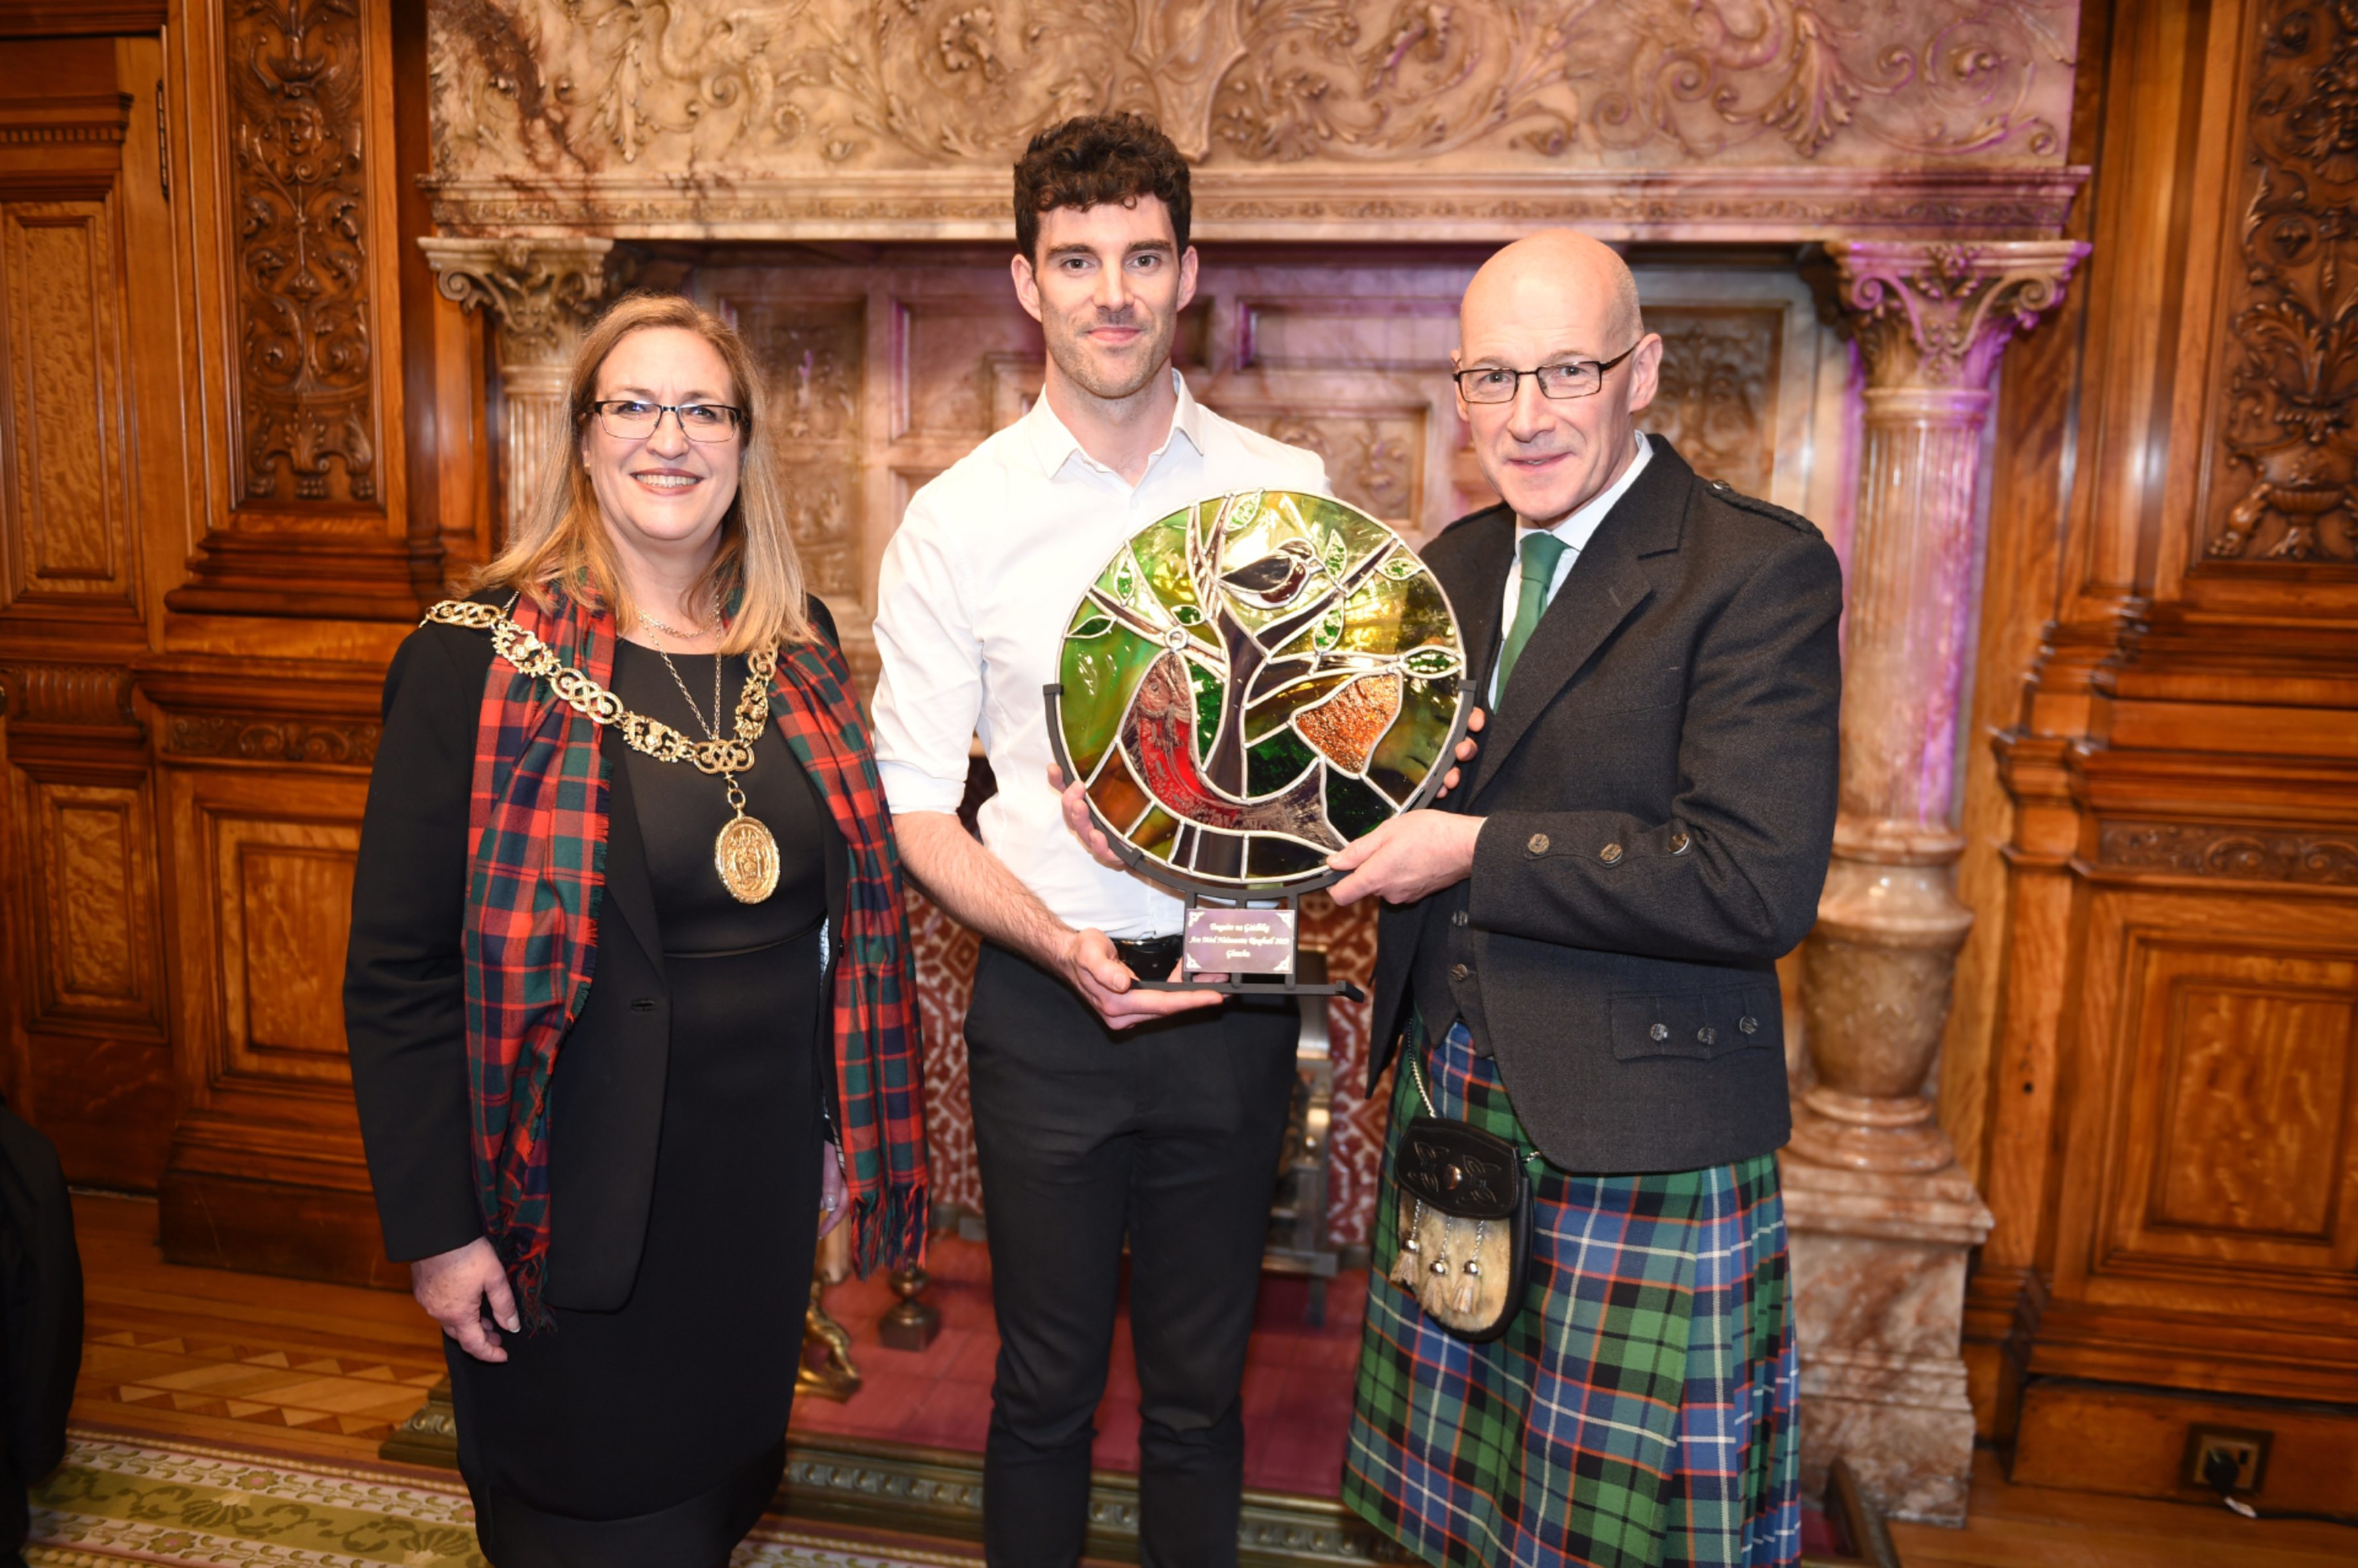 The Lord Provost of Glasgow, Eva Bolander with Alisdair Whyte, Gaelic Ambassador of the Year and John Swinney, Deputy First Minister of Scotland, at The Royal National Mod 2019 in Glasgow City Chambers

Picture by Sandy McCook